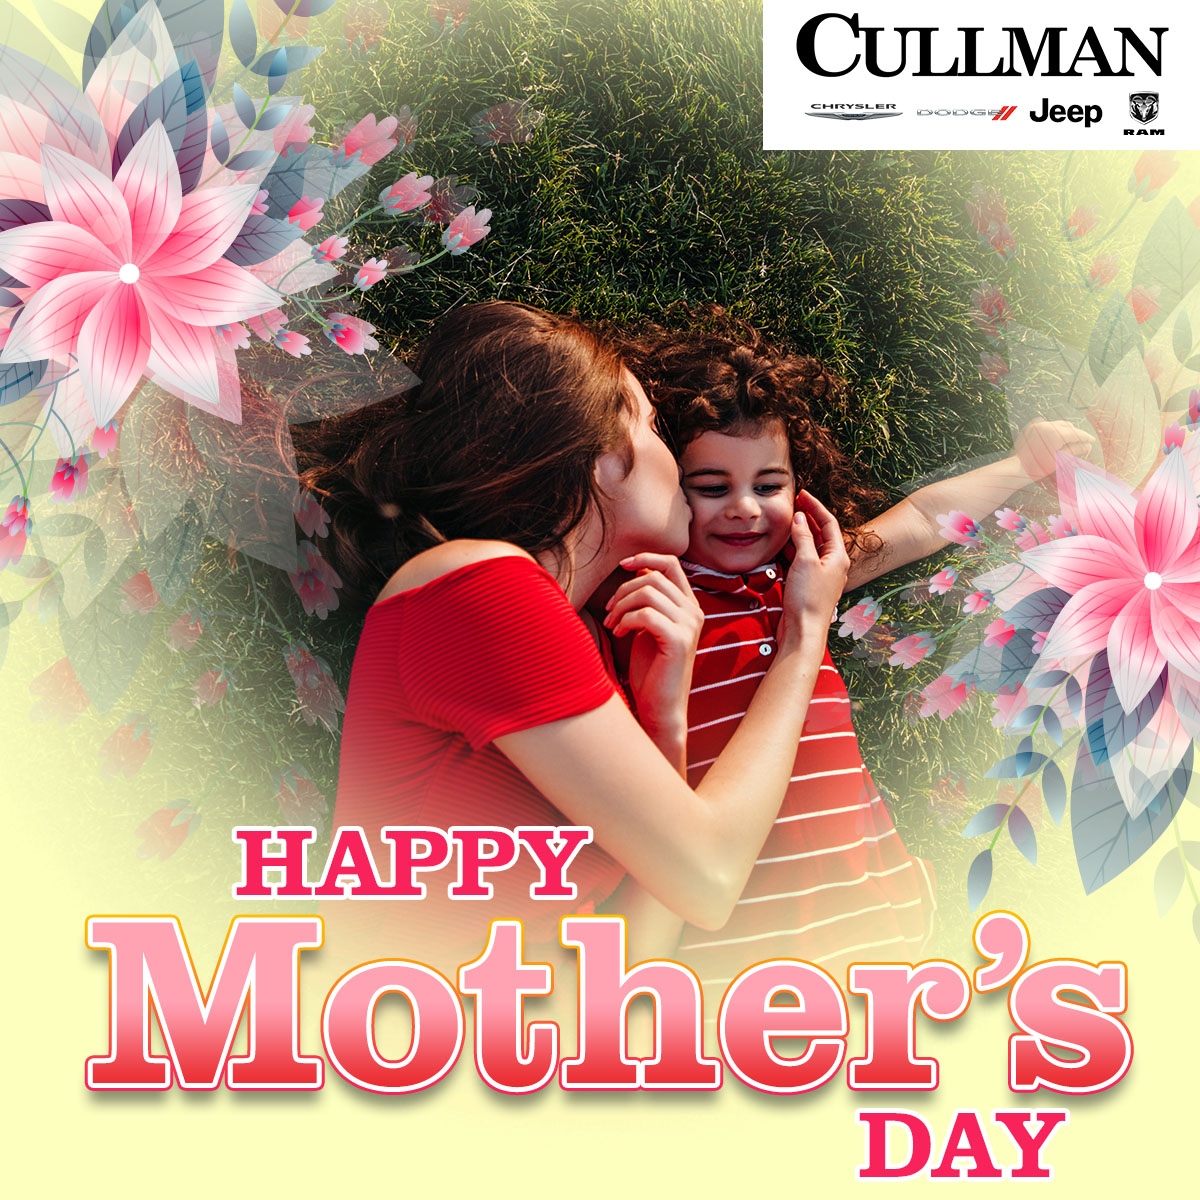 Skip the usual gifts this Mother's Day and surprise your mom with a new vehicle that reflects her amazing style! 🚘 ❣️ #MothersDay #HappyMothersDay